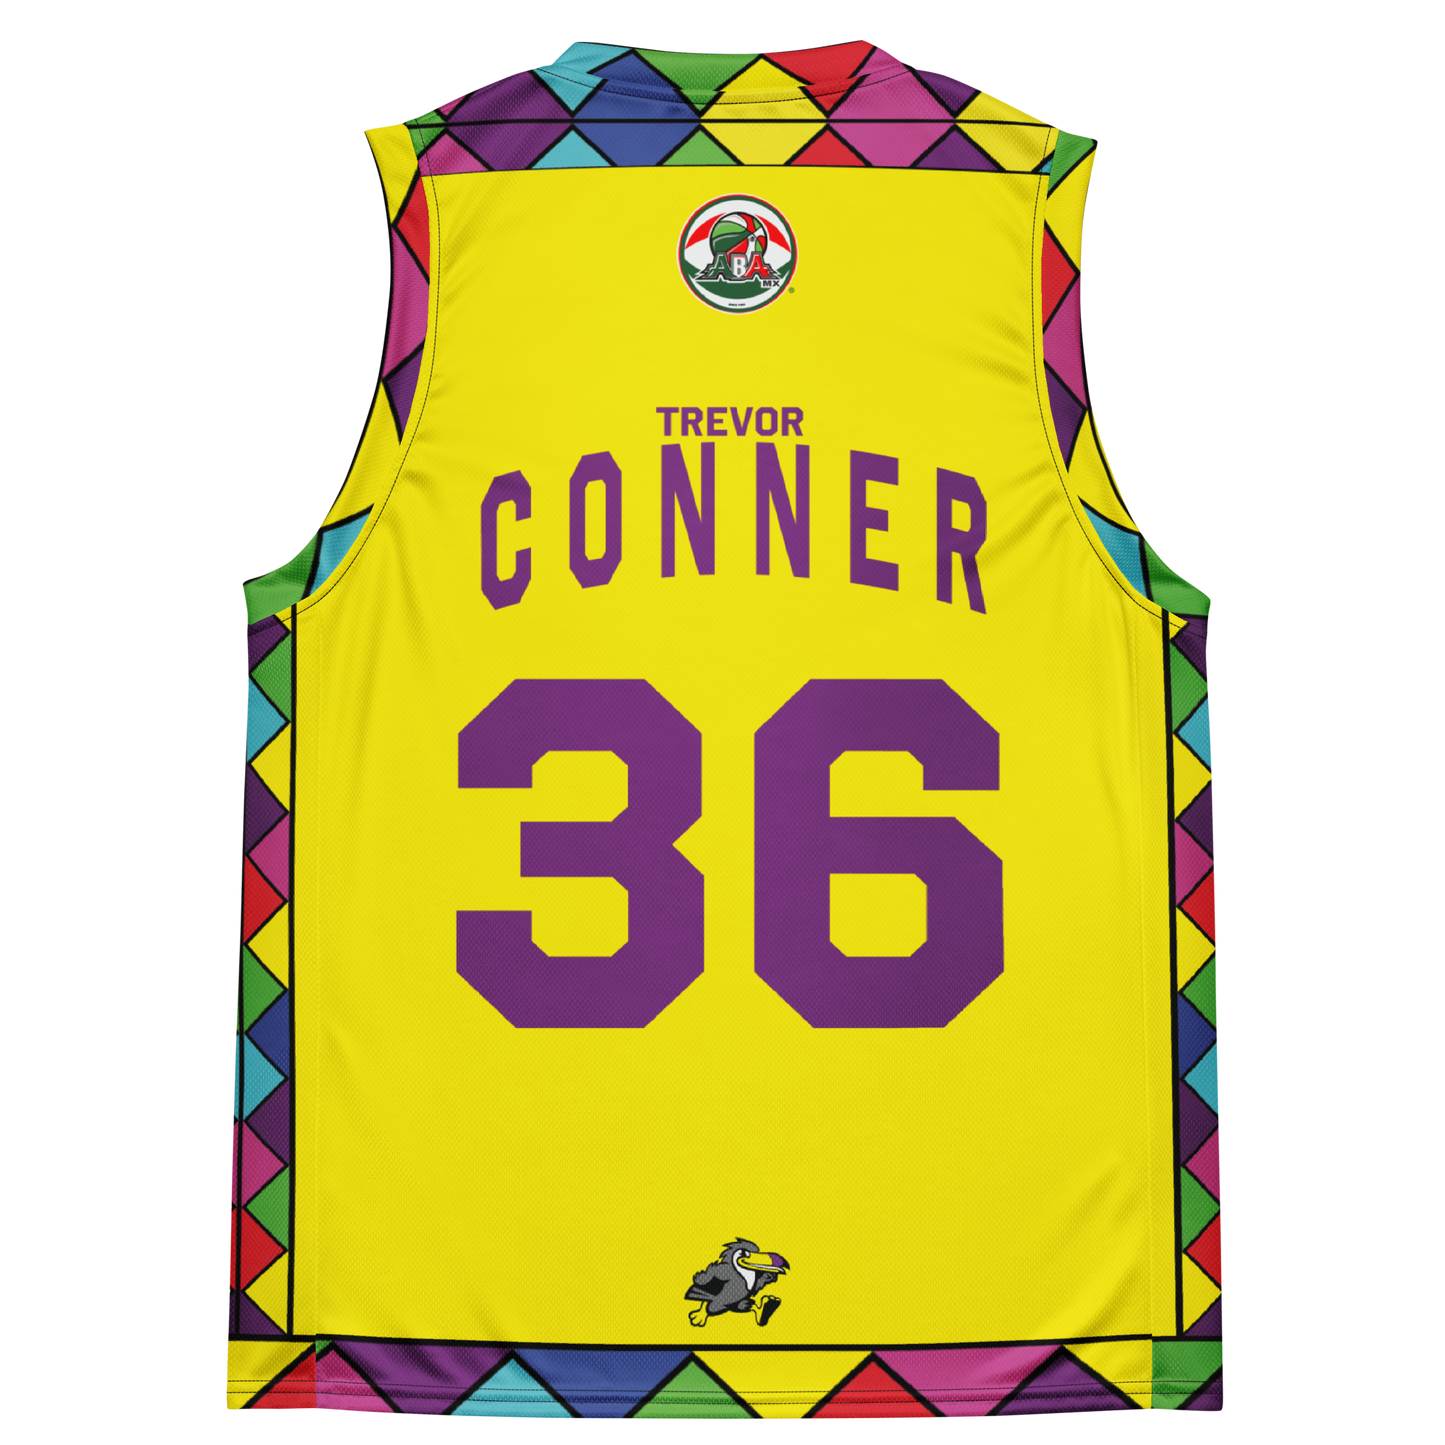 The Trevor Conner #36 Yellow Jersey